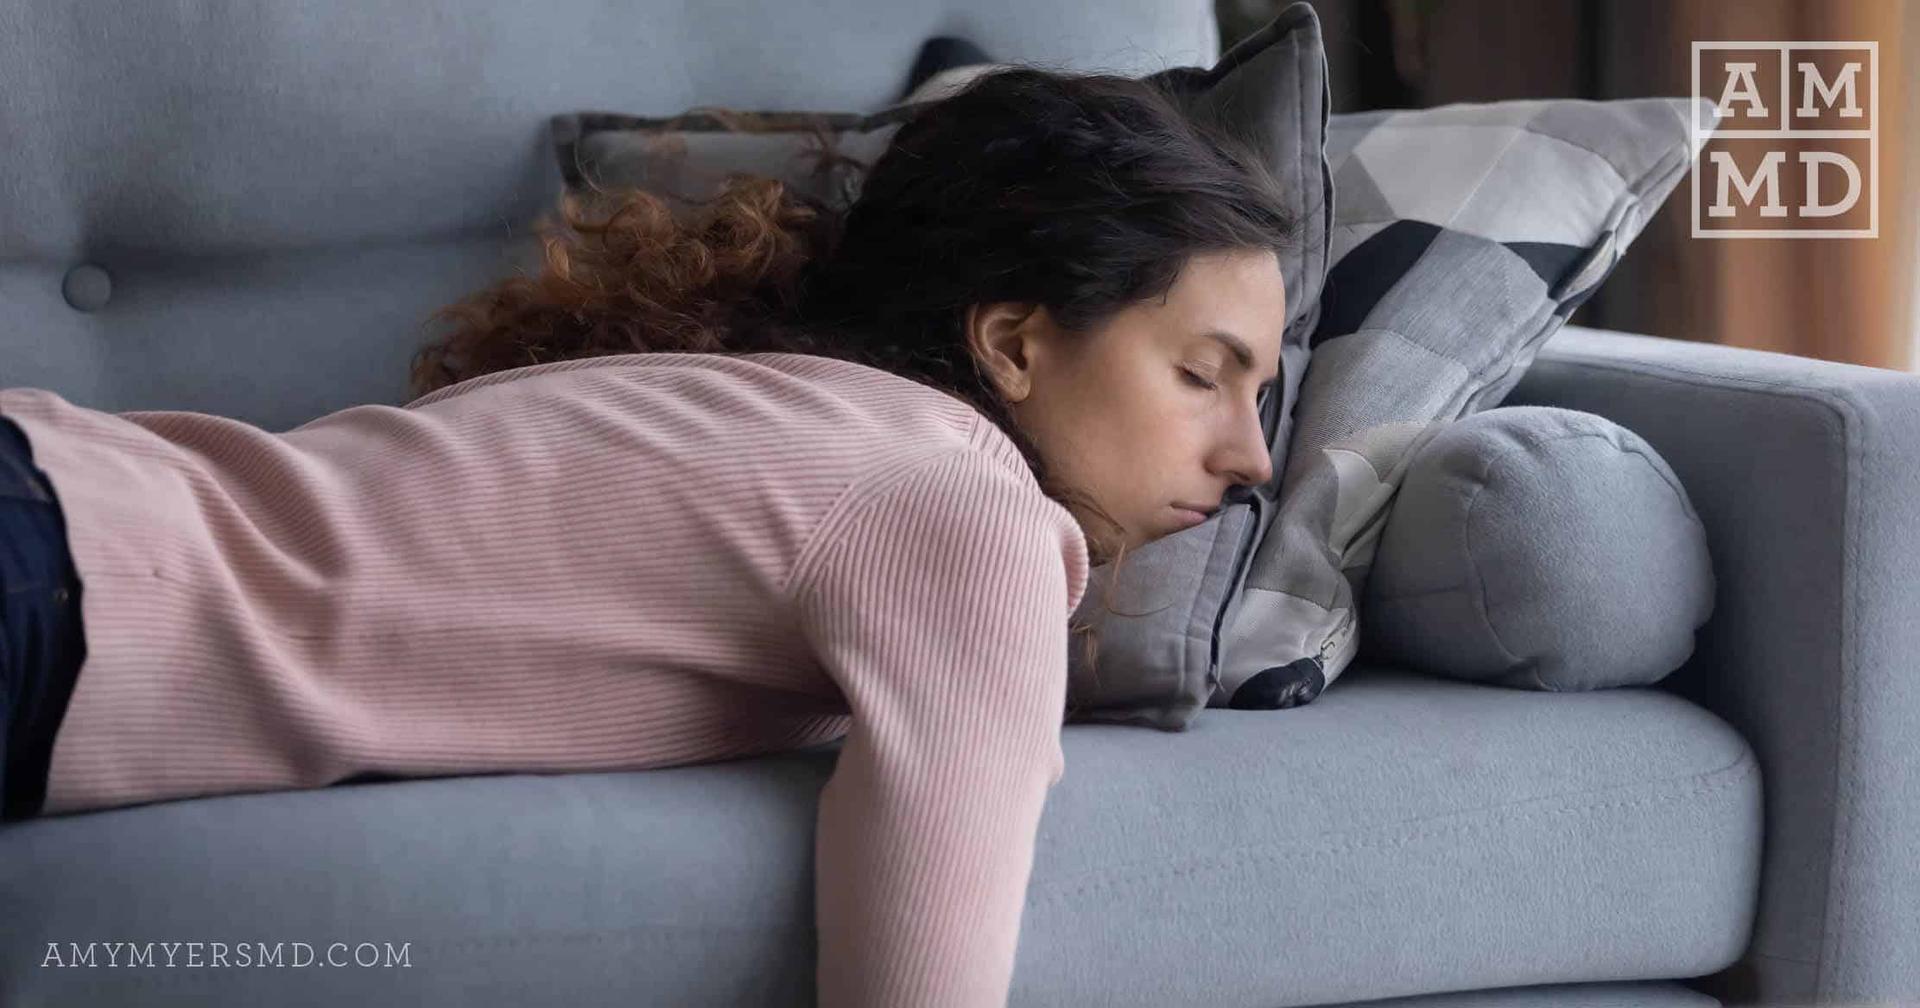 Adrenal Fatigue: All You Need to Know